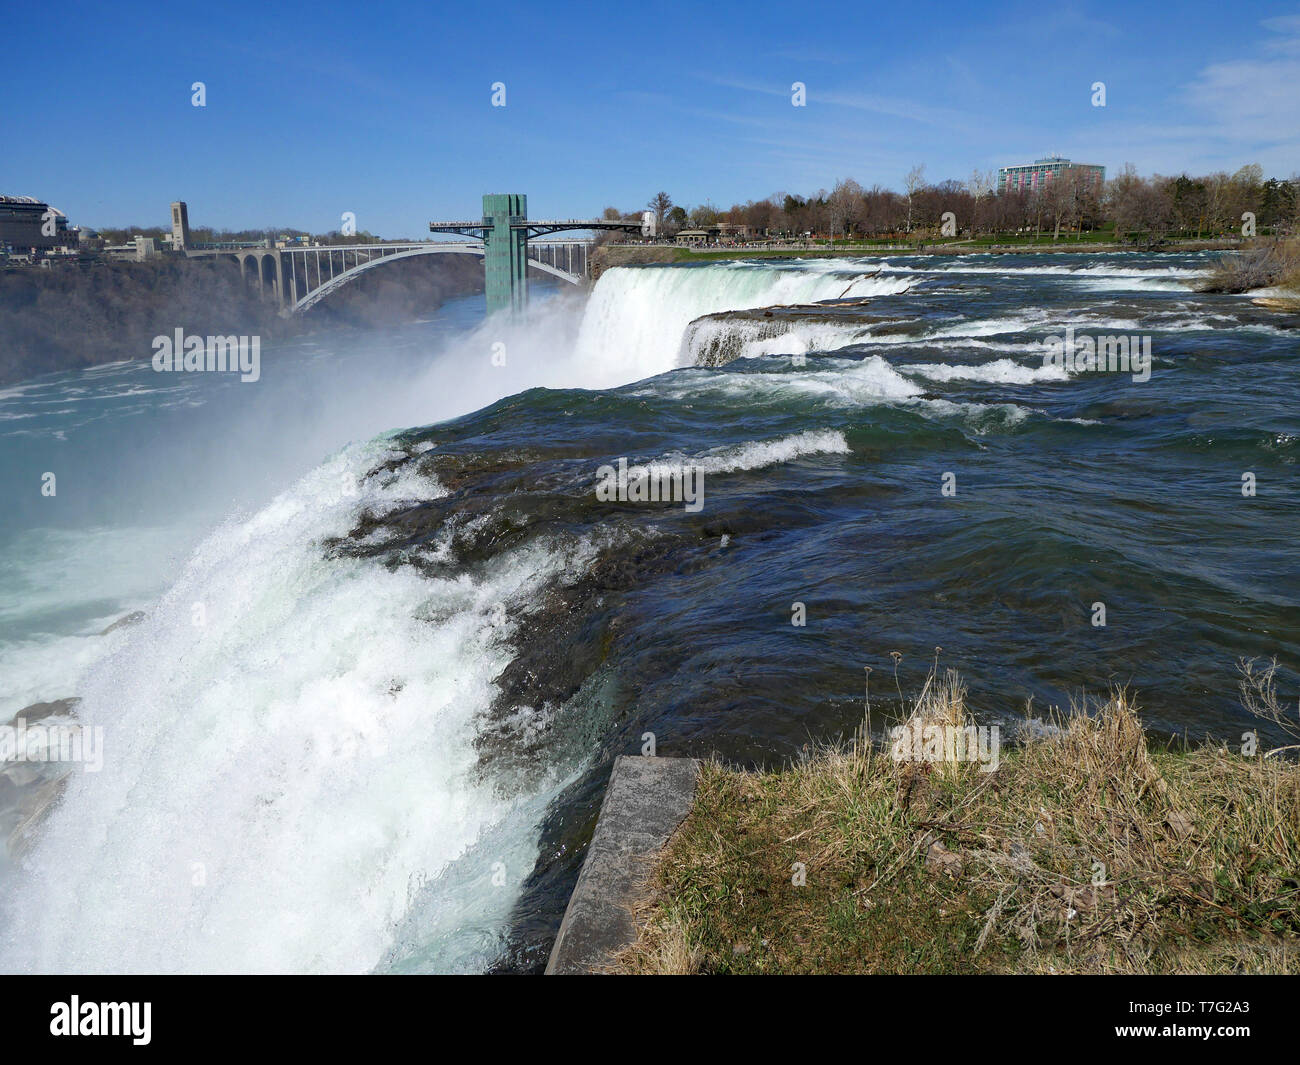 Niagara Falls, close up view of the edge of the waterfall with Rainbow Bridge and observation tower in the background Stock Photo